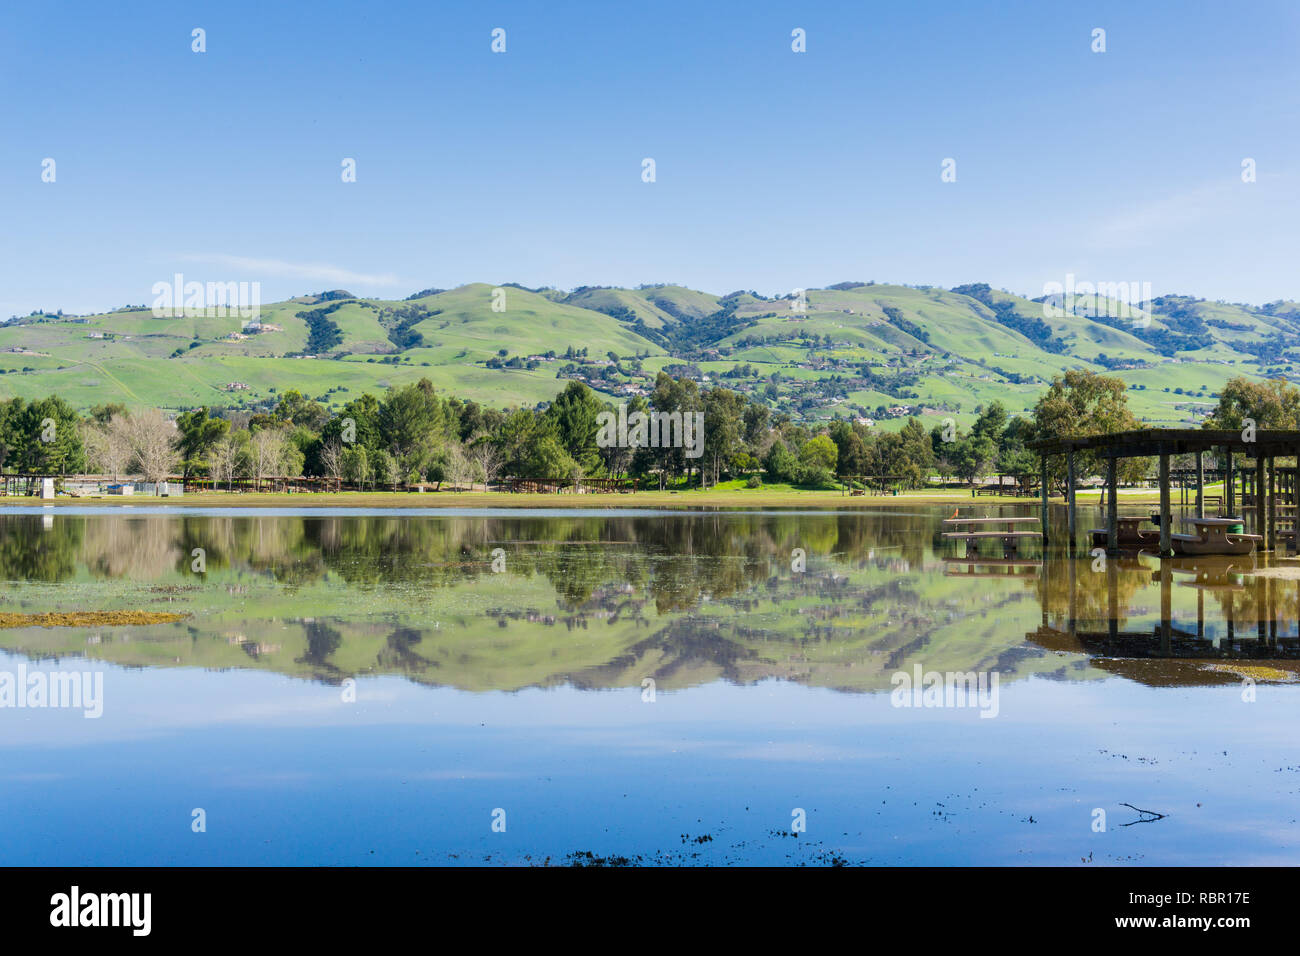 Landscape in Cunningham Lake; green mountains in the background, San Jose, south San Francisco bay, California Stock Photo